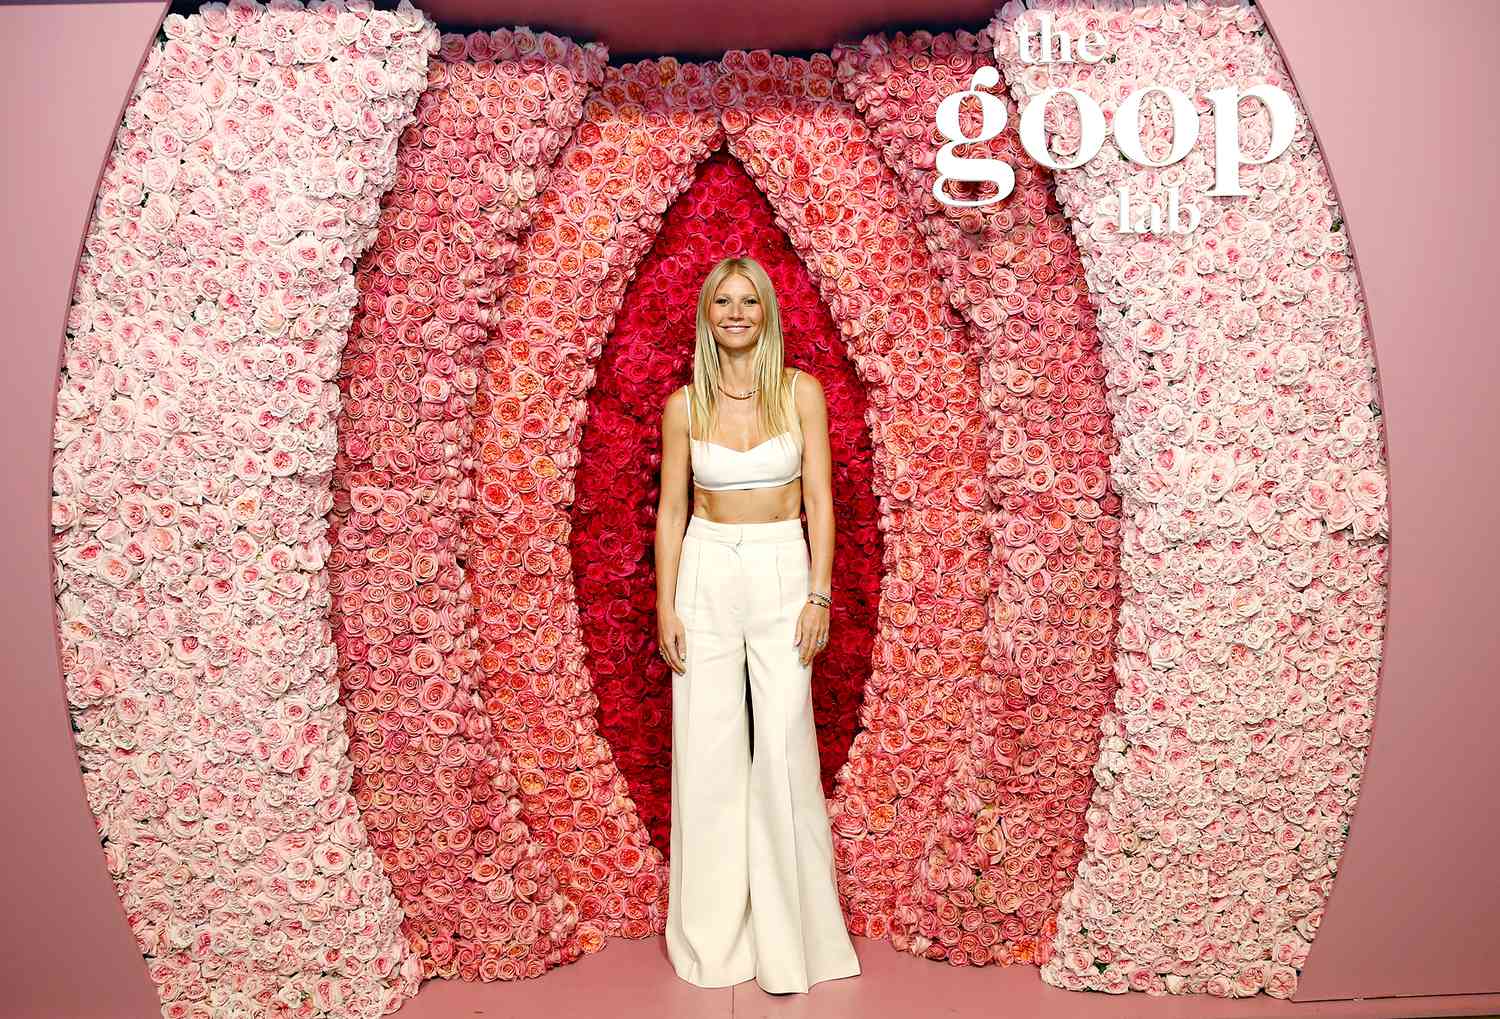 Gwyneth Paltrow on the Powerful Message Behind Her Vagina Candles: Women ‘Deserve to Have That Agency’